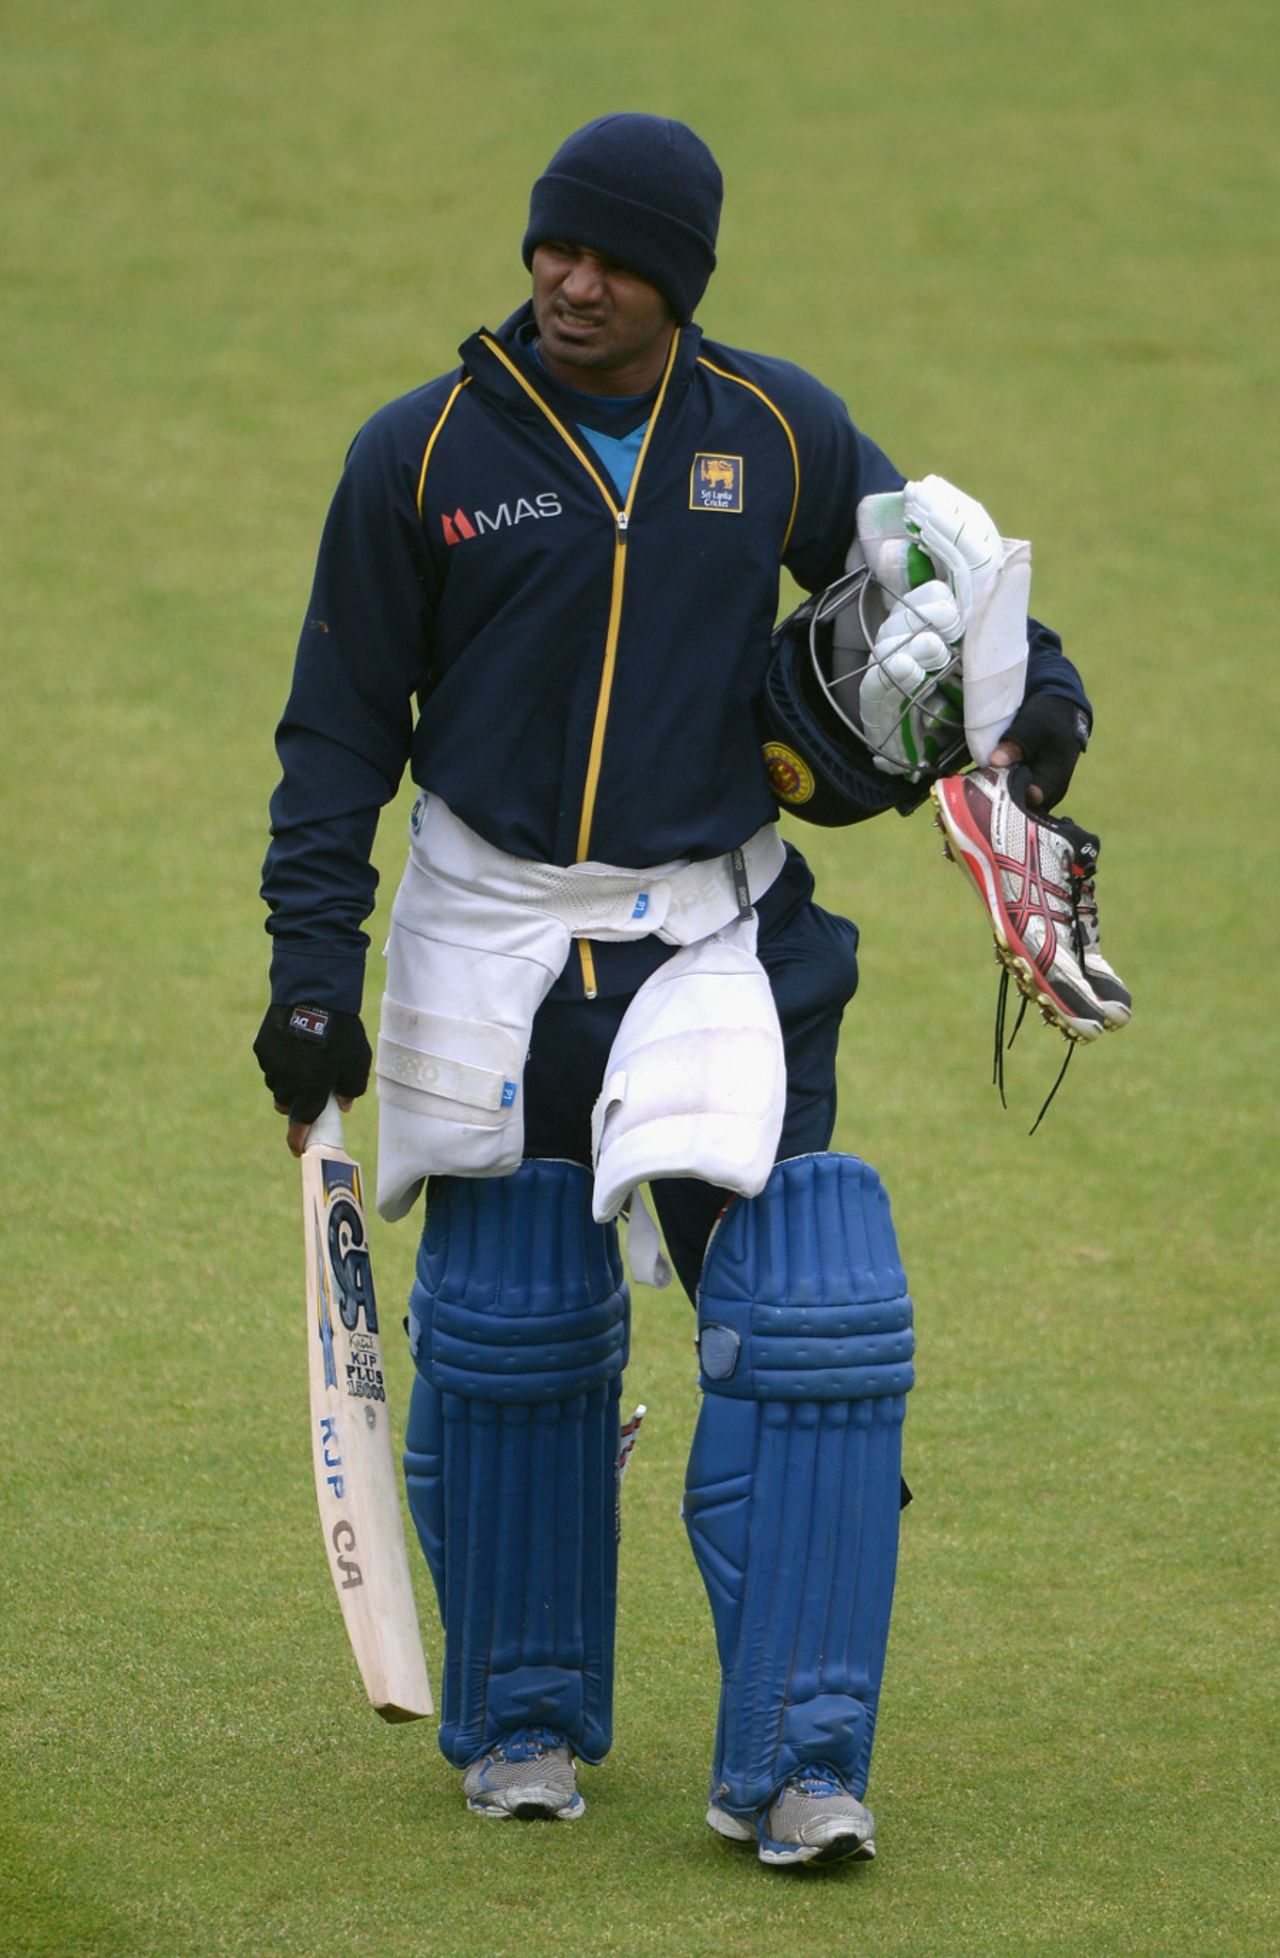 Kusal Perera needed a few layers at training, Chester-le-Street, May 24, 2014